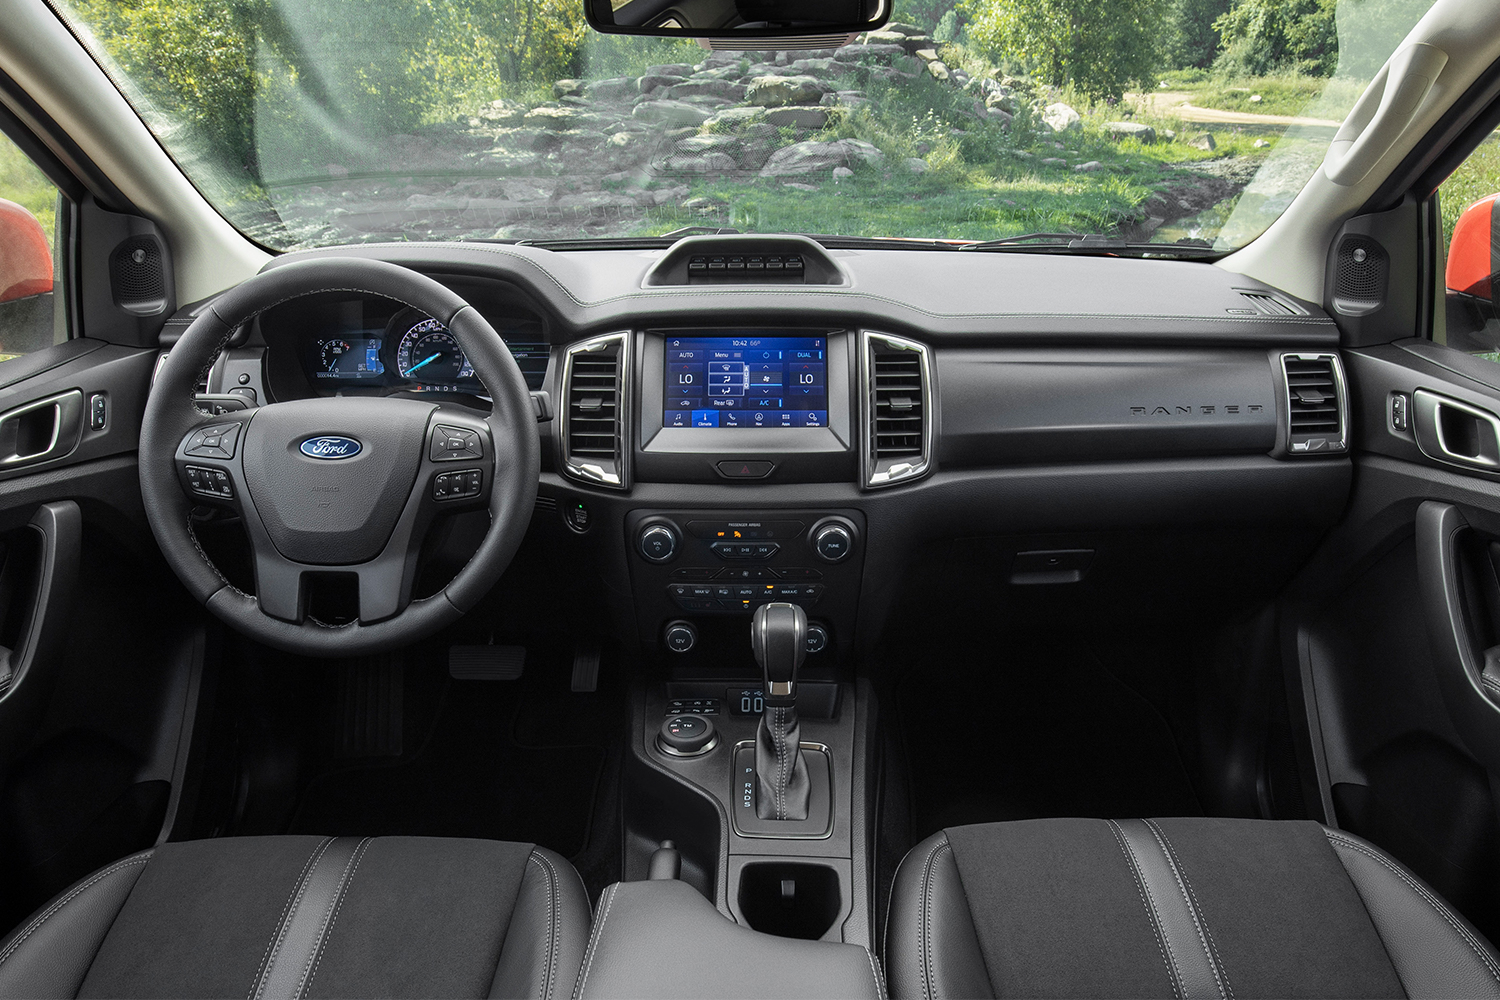 The front two seats of the 2021 Ford Ranger Tremor pickup truck